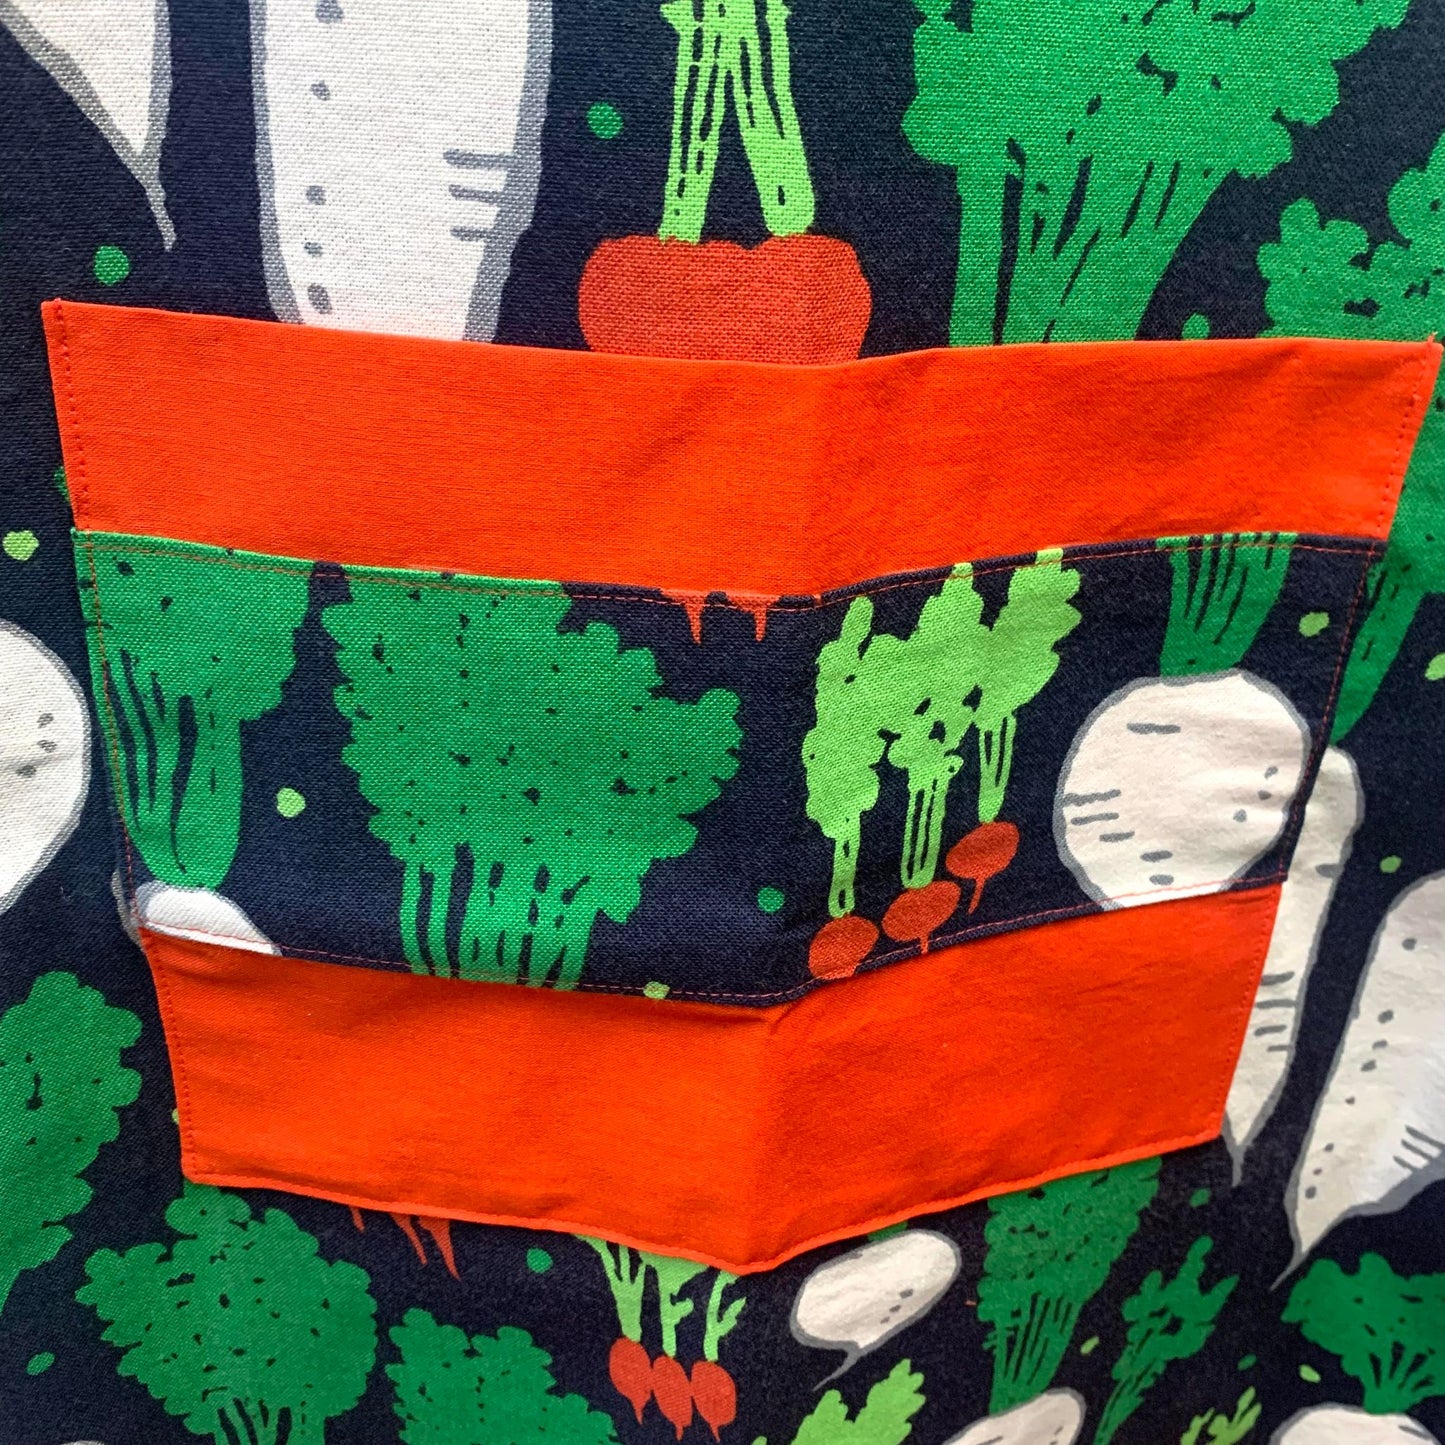 MAKIN' WHOOPEE - "Eat Your Veges" Japanese Fabric Apron